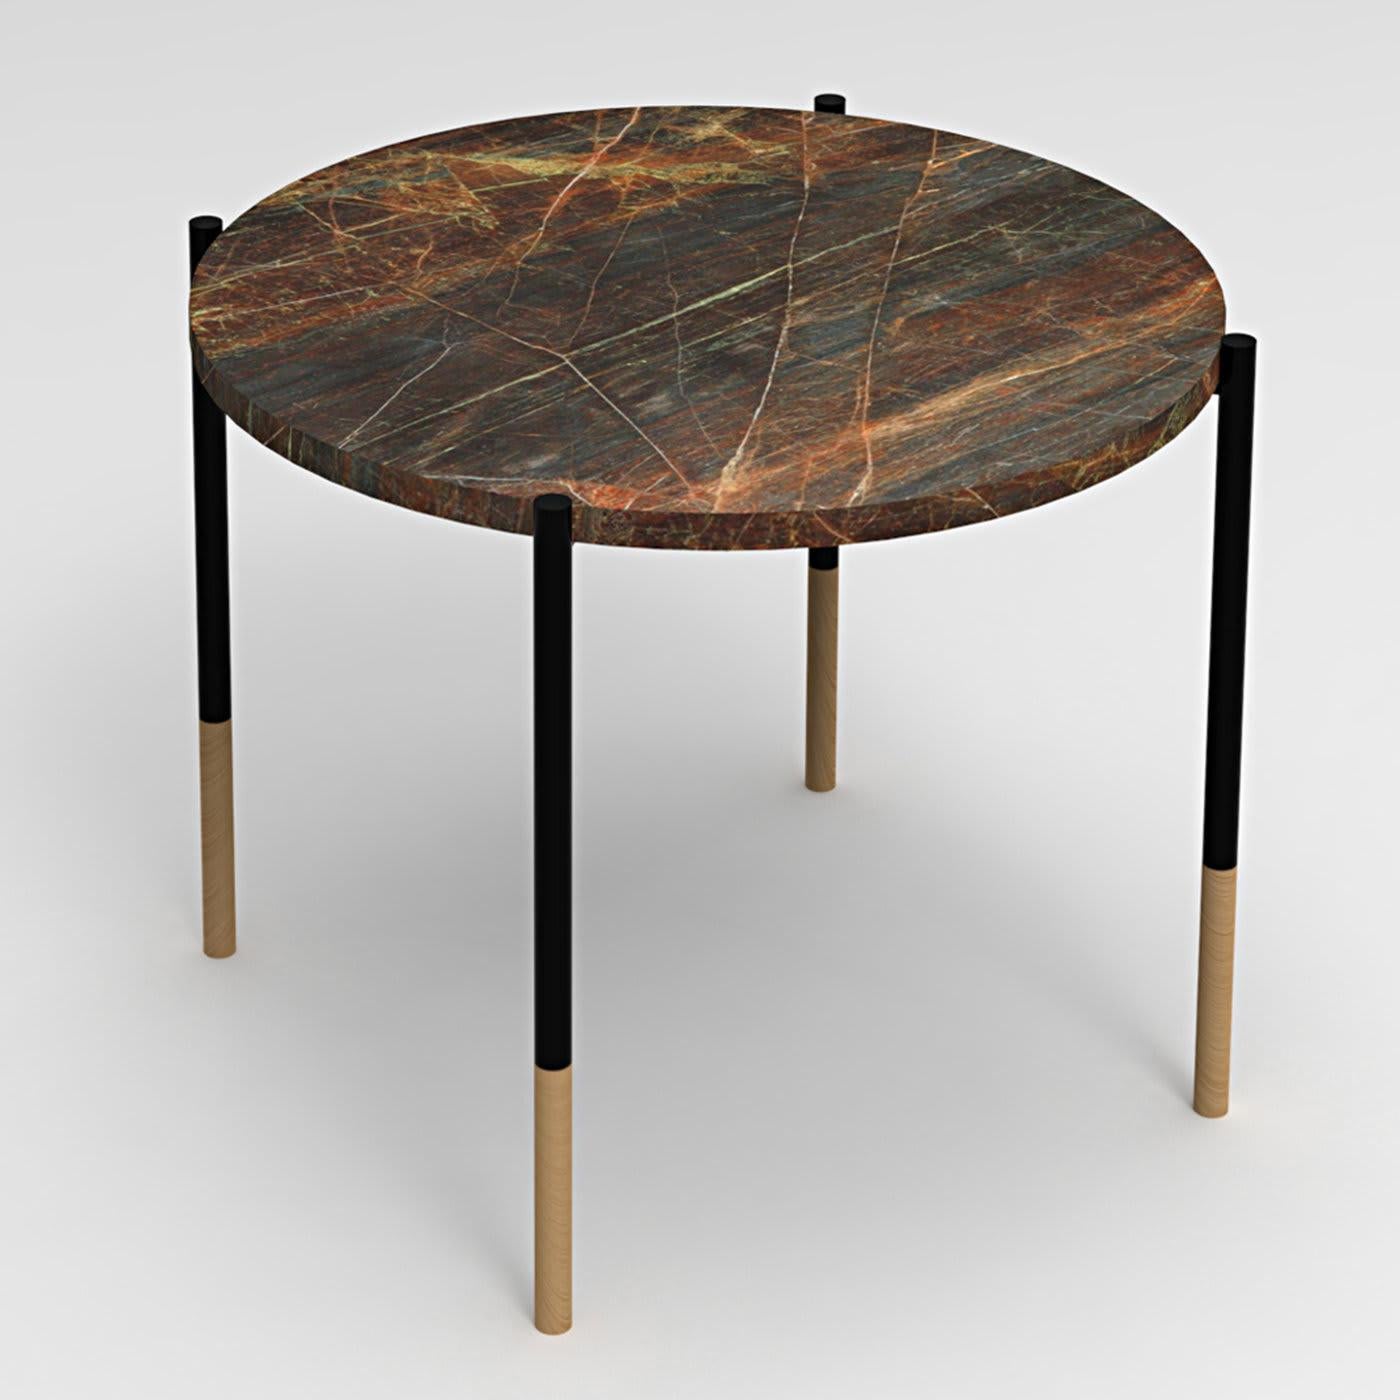 Flaunting a complex design, this splendid set of two cocktail tables (small: Ø45 cm / H45 cm, large: Ø50 cm / H50 cm) belongs to the Innesti Collection. A circular top in precious marble is sustained by the slender, black-lacquered metal frame whose